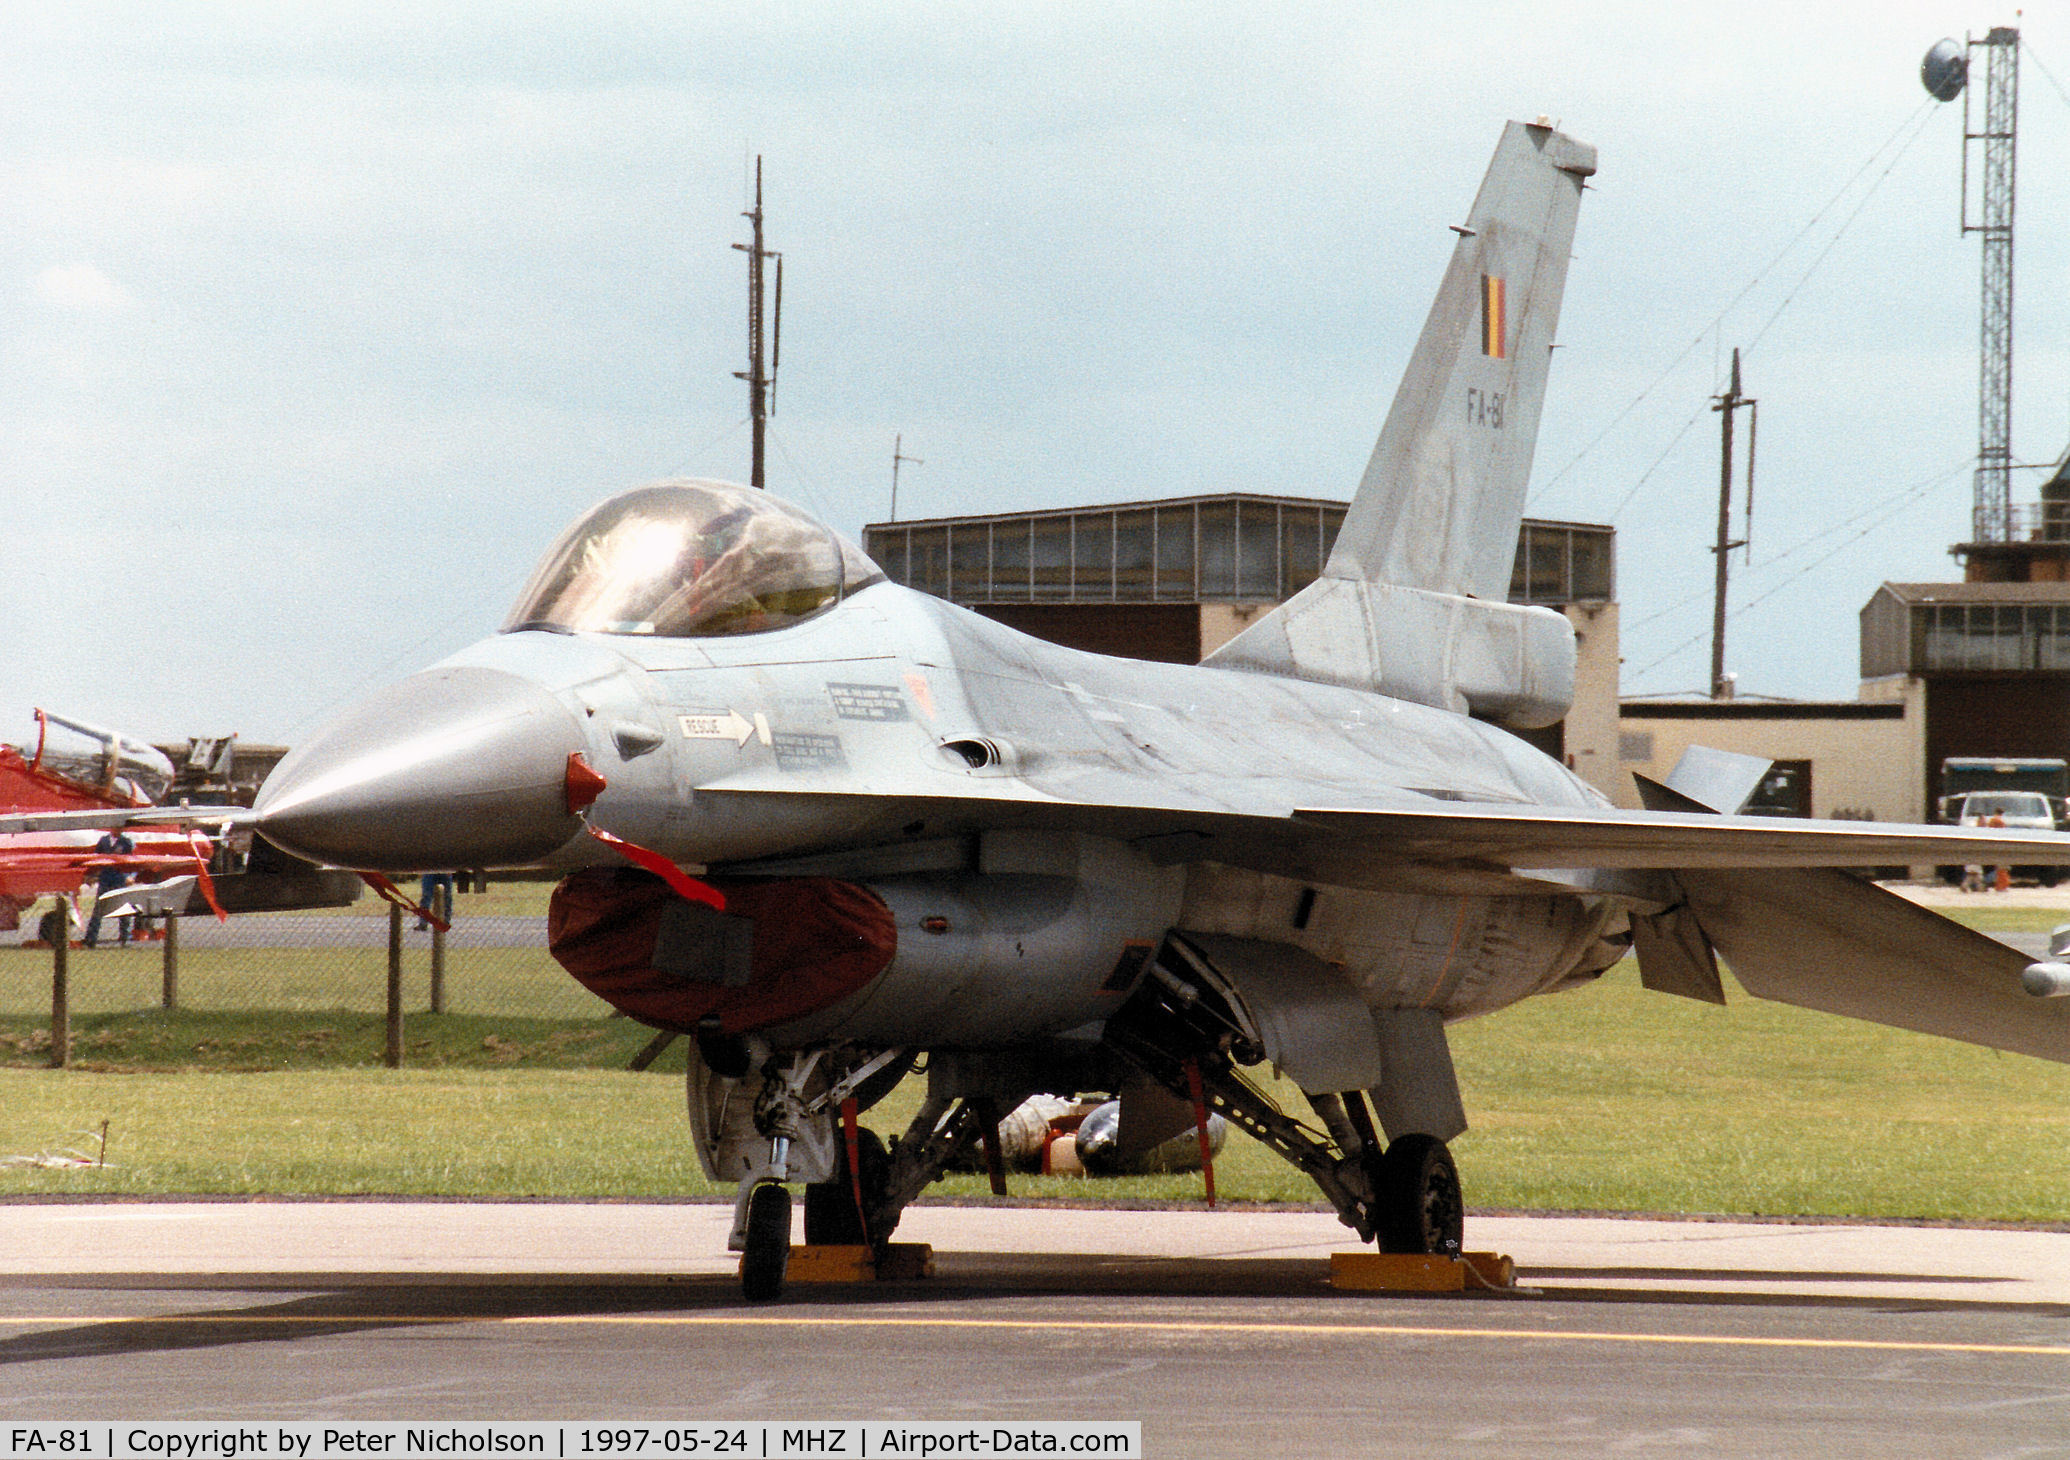 FA-81, SABCA F-16AM Fighting Falcon C/N 6H-81, F-16A Falcon, callsign Bull 11, of the Belgian Air Force's 2 Wing on the flight-line at the 1997 RAF Mildenhall Air Fete.